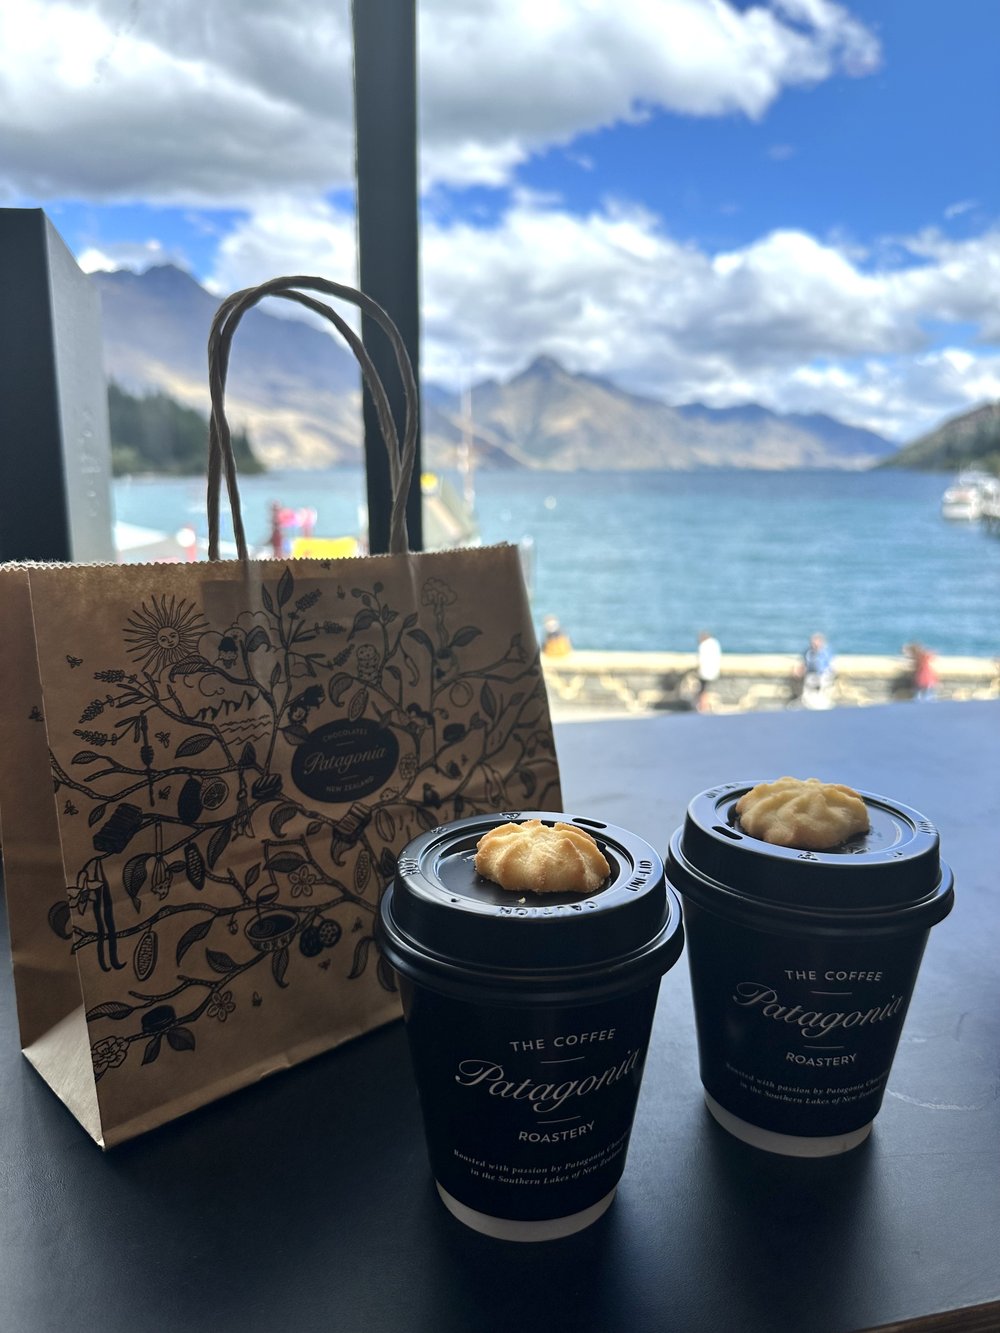 Shopping for chocolate in Queenstown